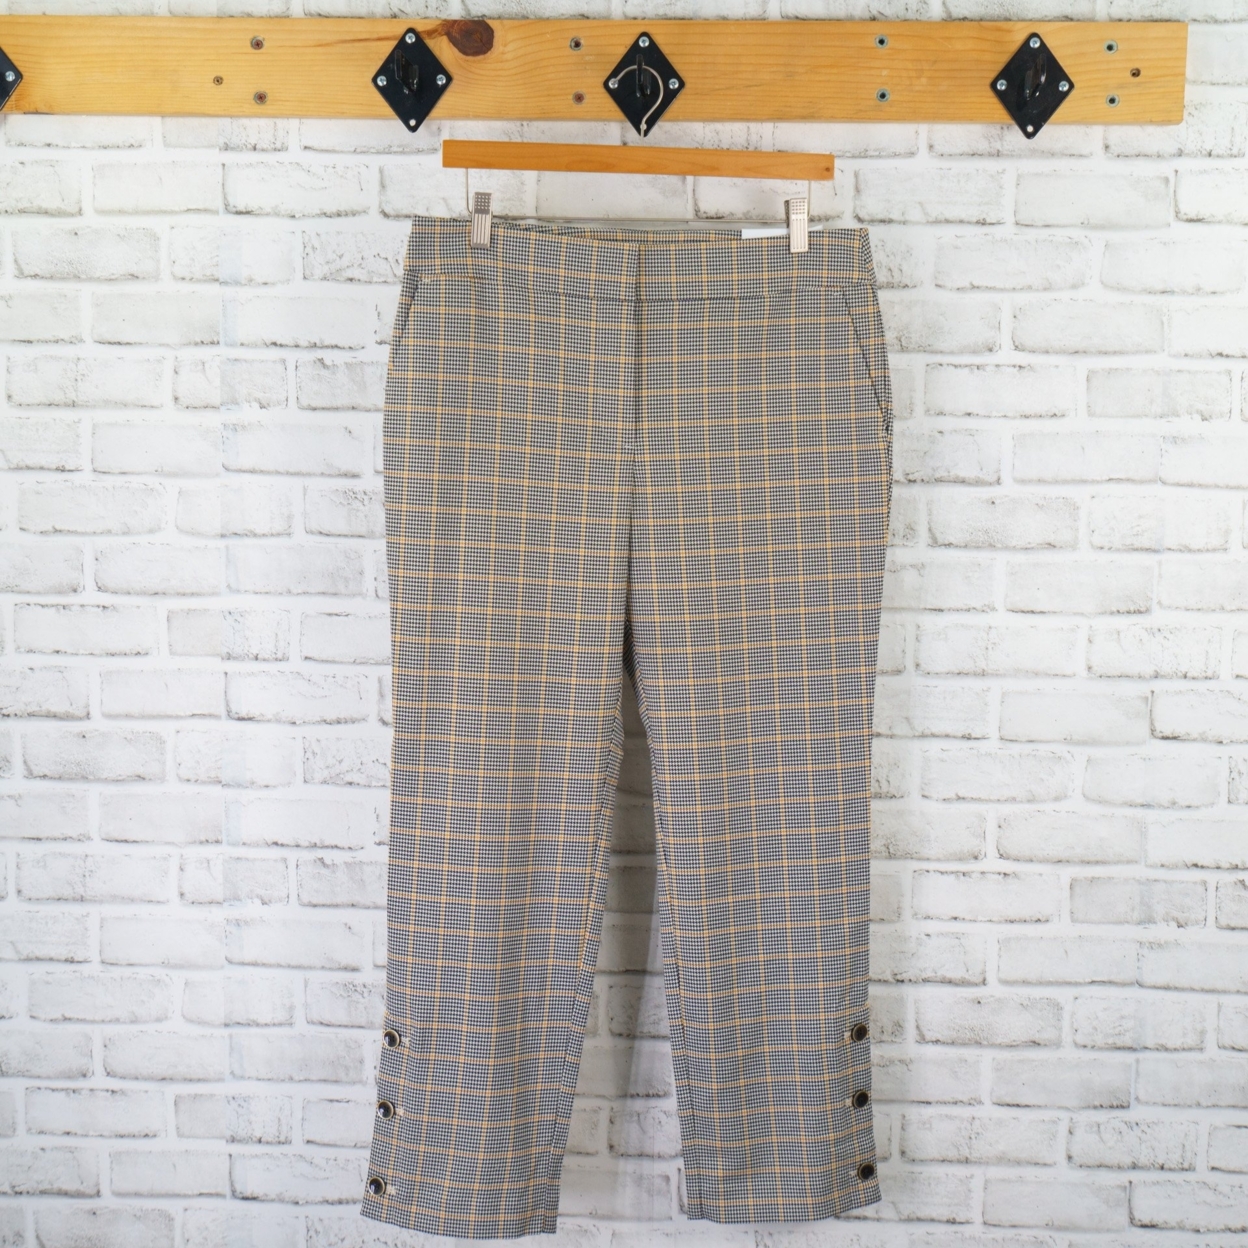 Ann Taylor Houndstooth High Waist Ankle Pant Size 8